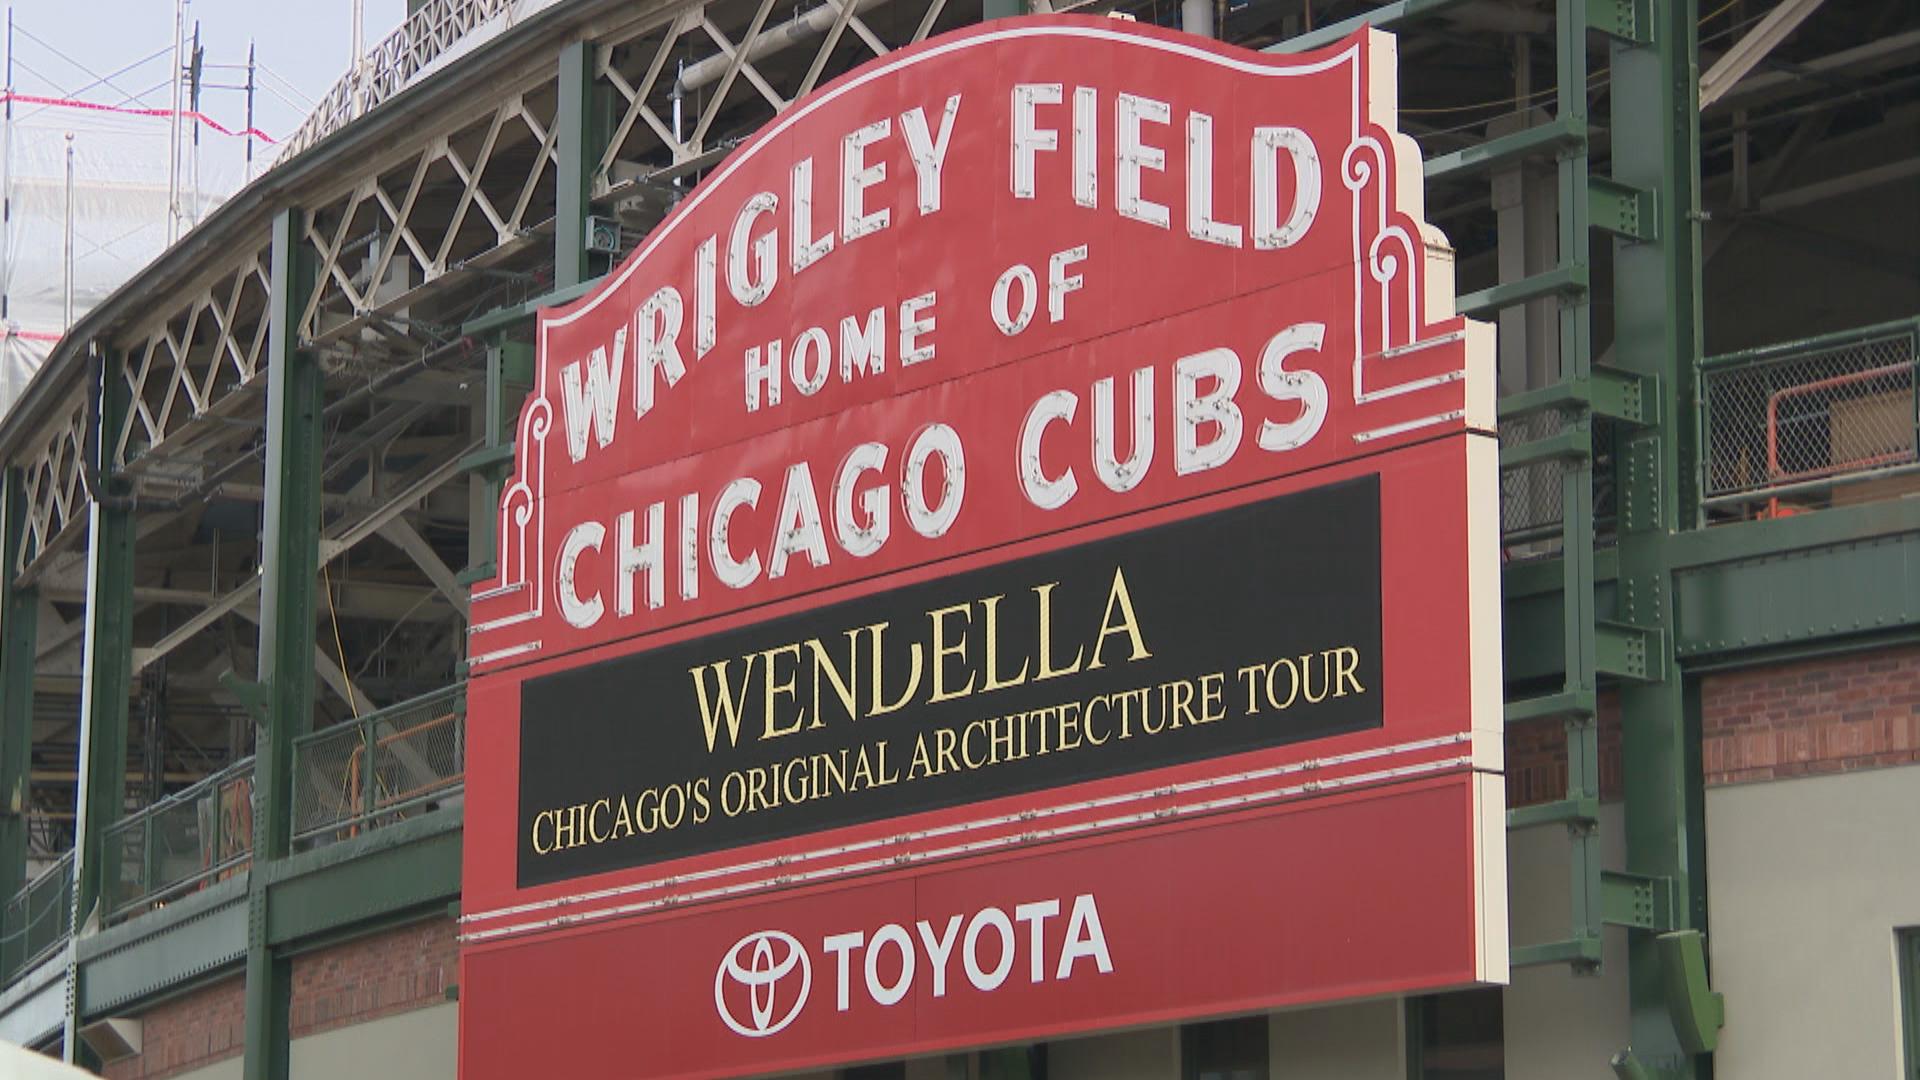 Wrigley Field's major renovations on schedule, team says